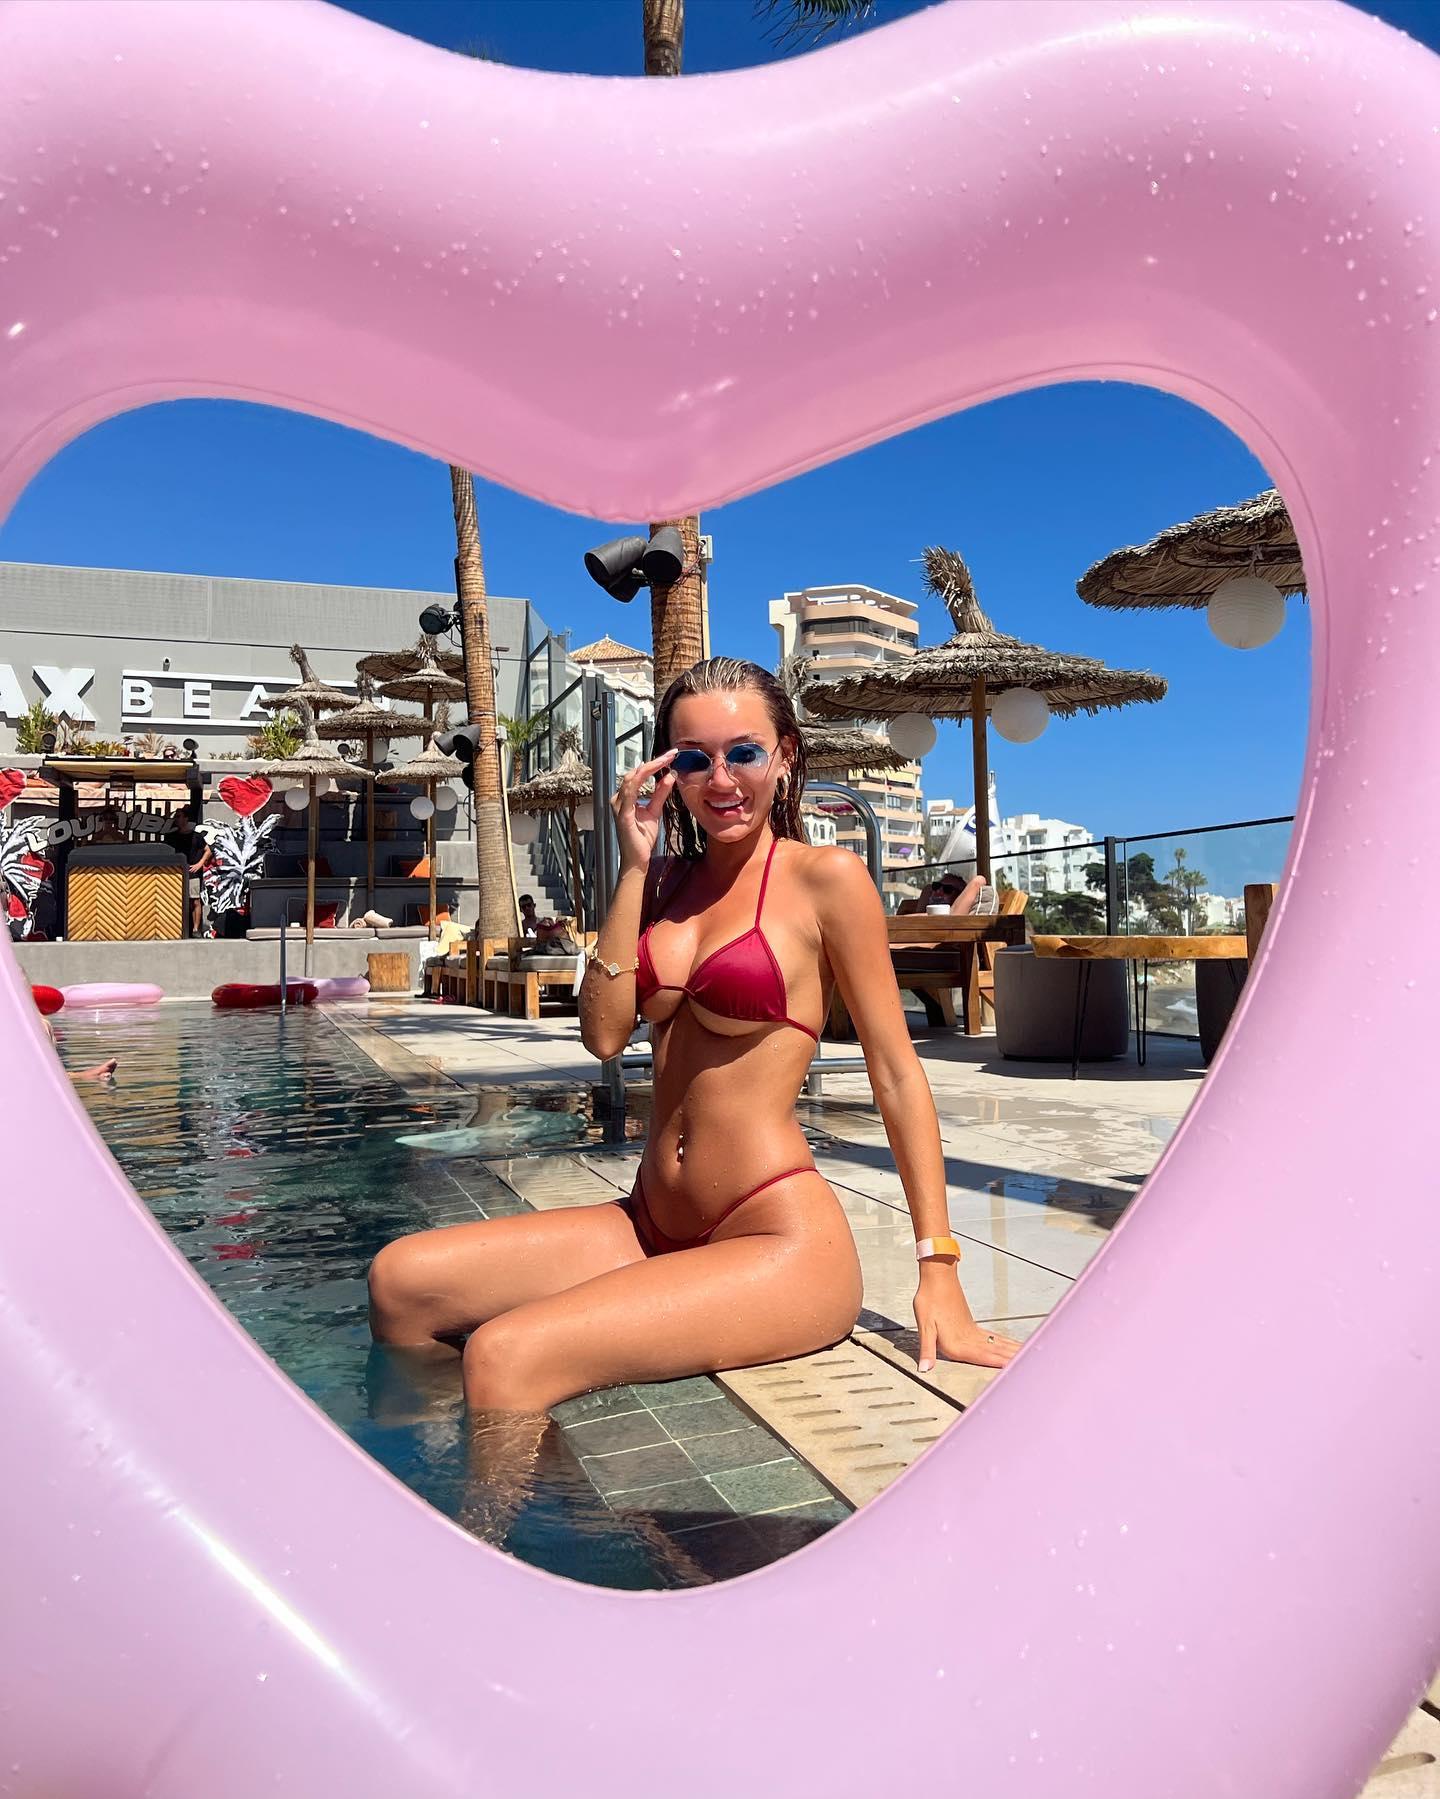 Beaux Raymond shares a throwback showing her in a red bikini at the pool